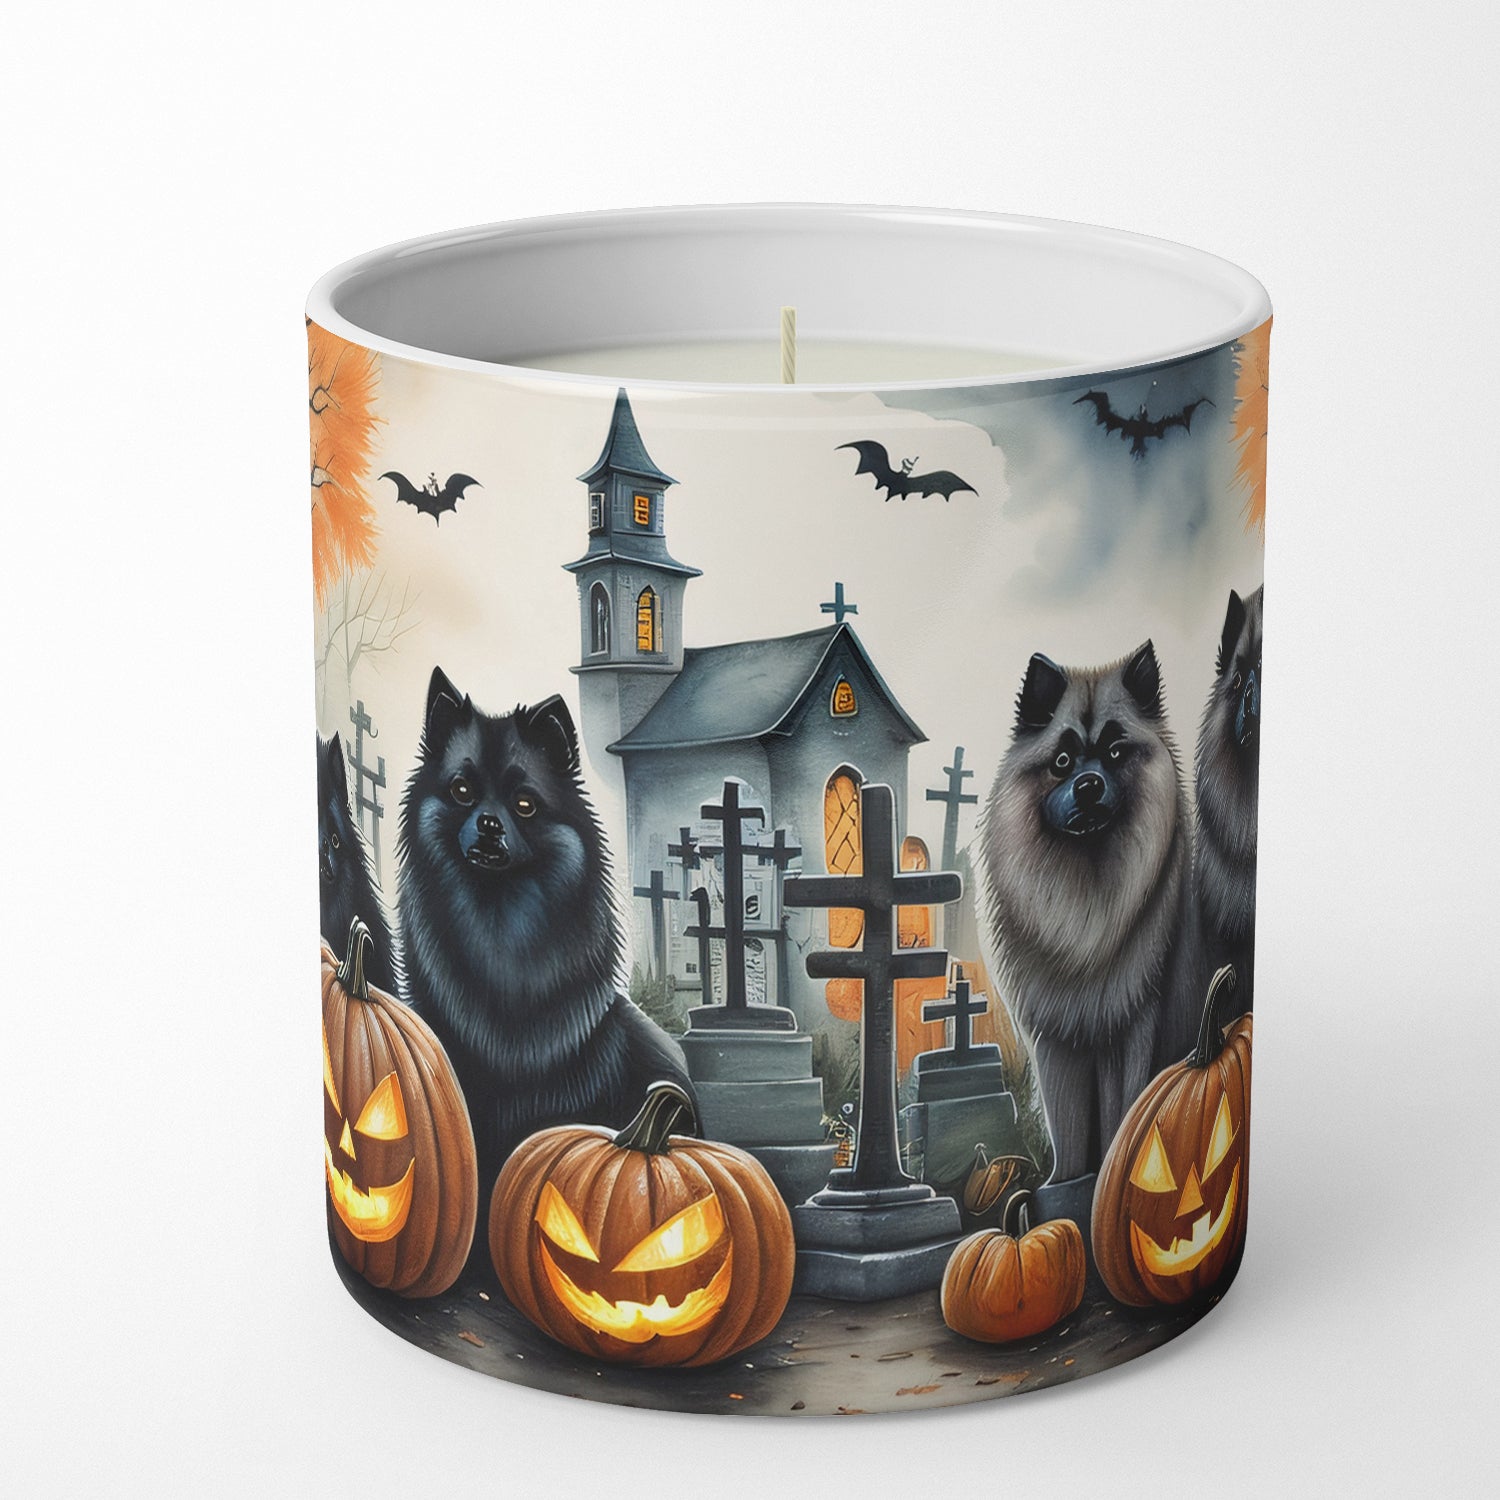 Keeshond Spooky Halloween Decorative Soy Candle